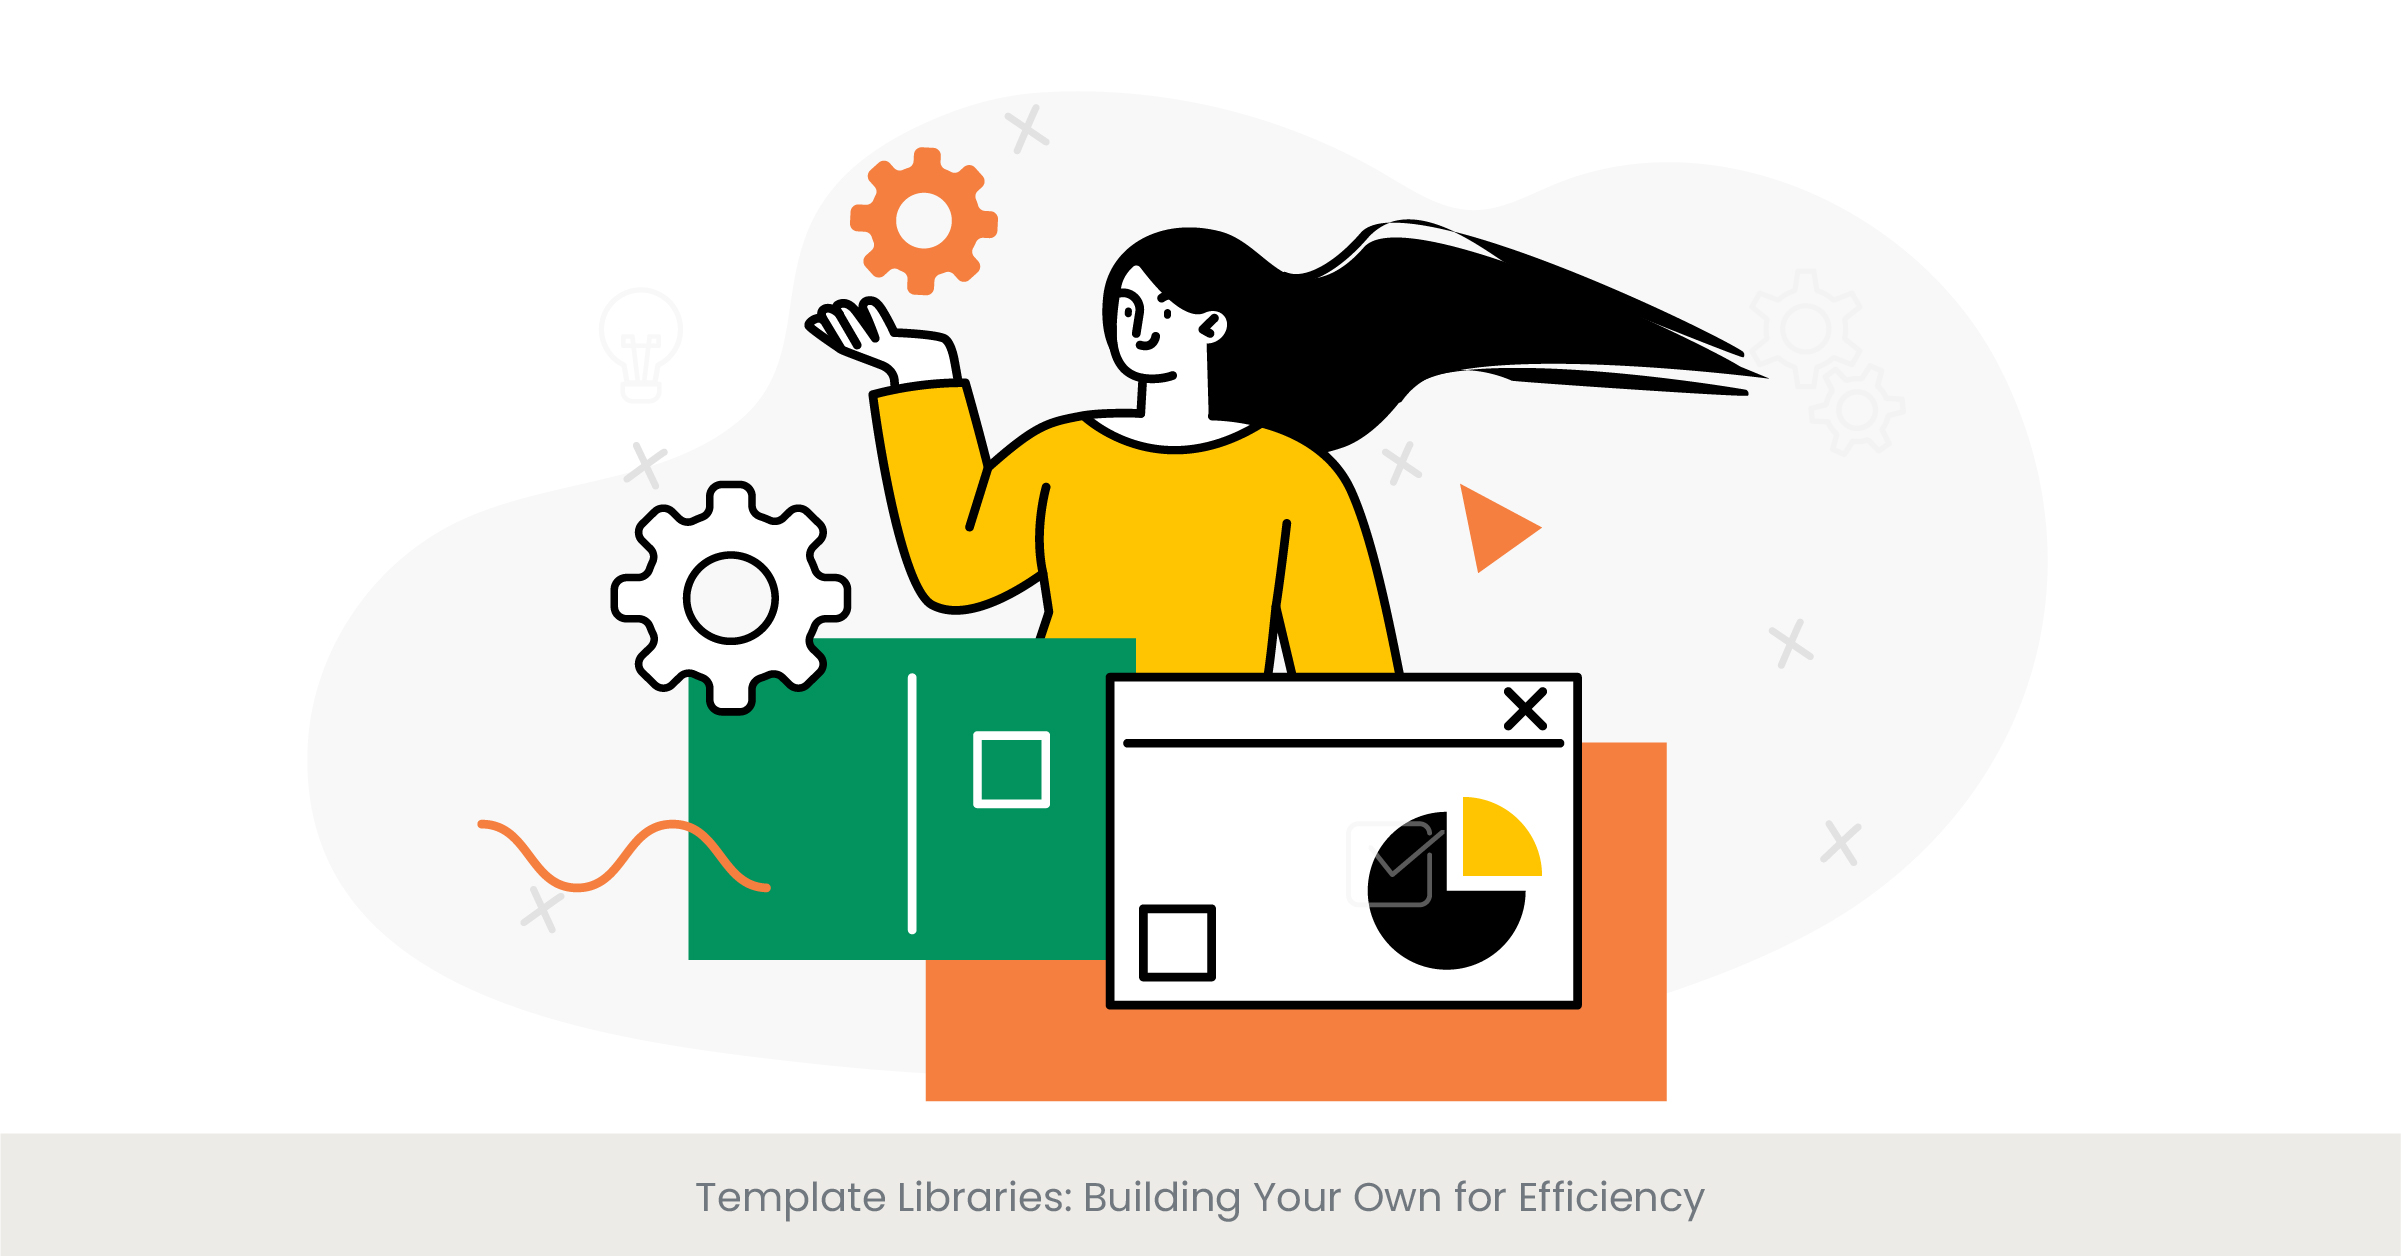 Template Libraries: Building Your Own for Efficiency